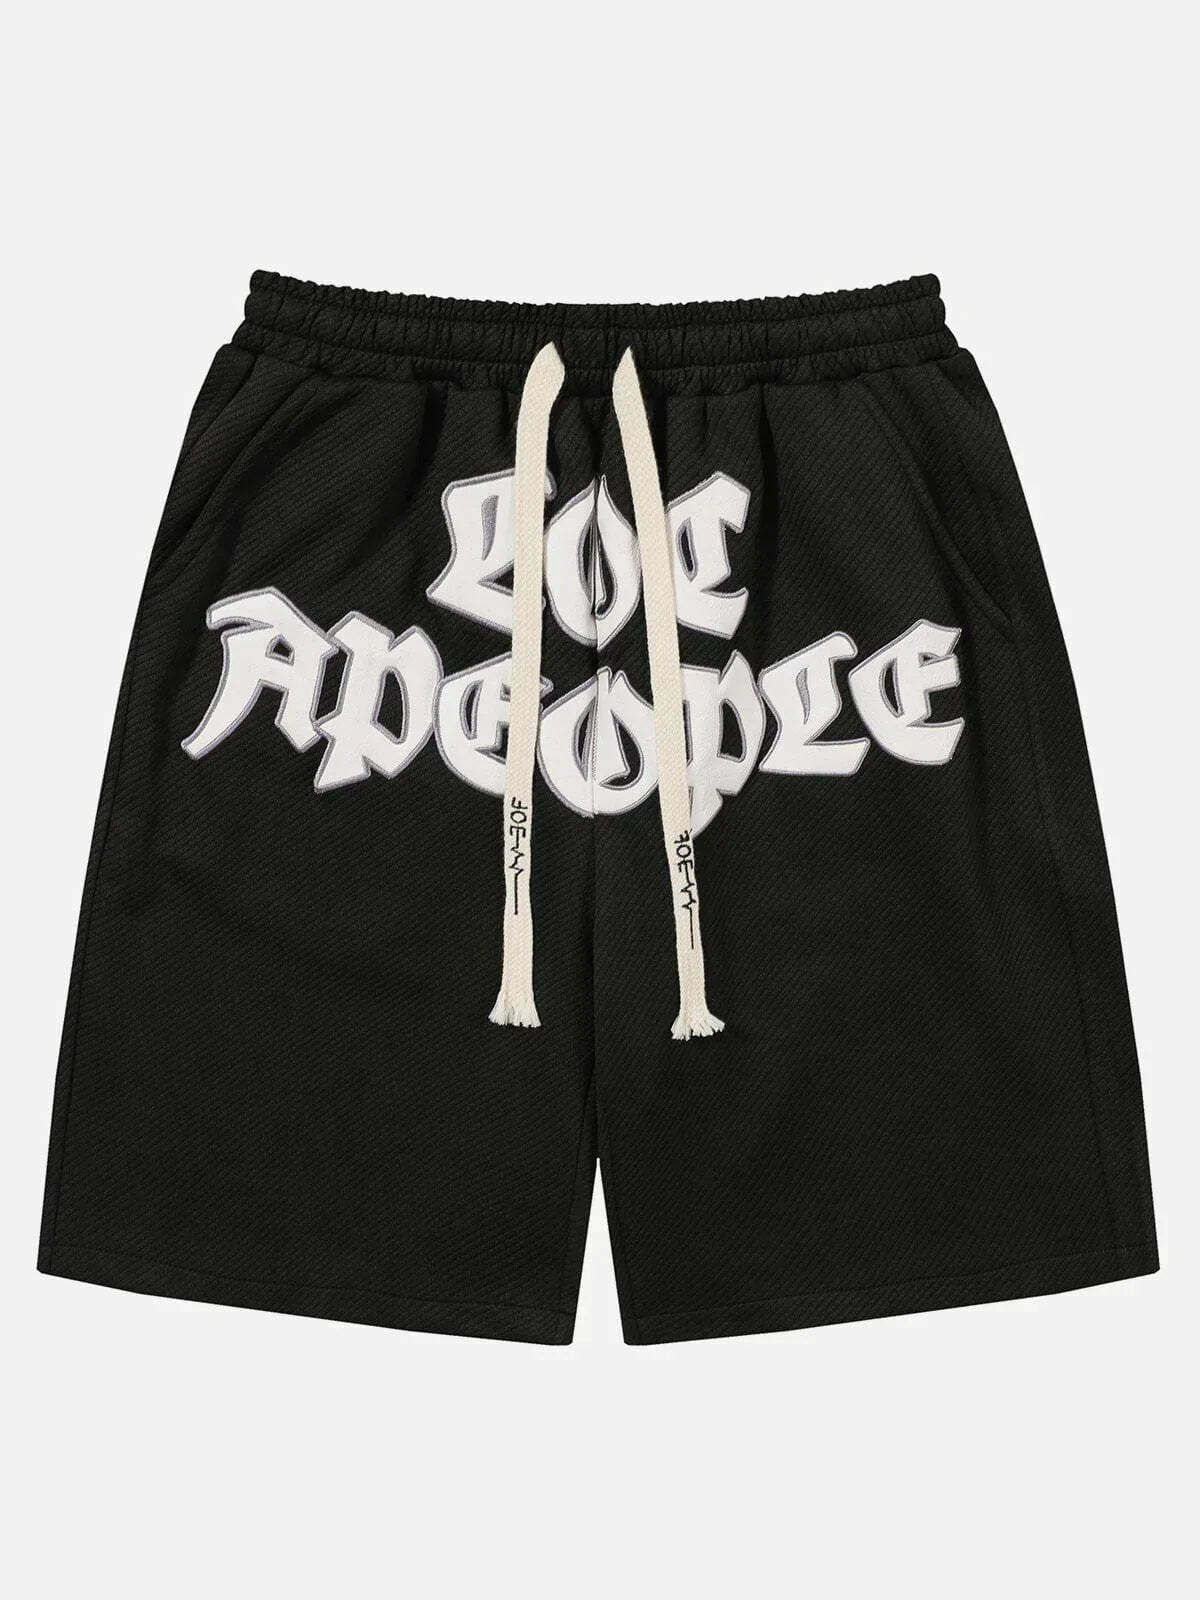 embroidered hip hop shorts urban streetwear essential 7197